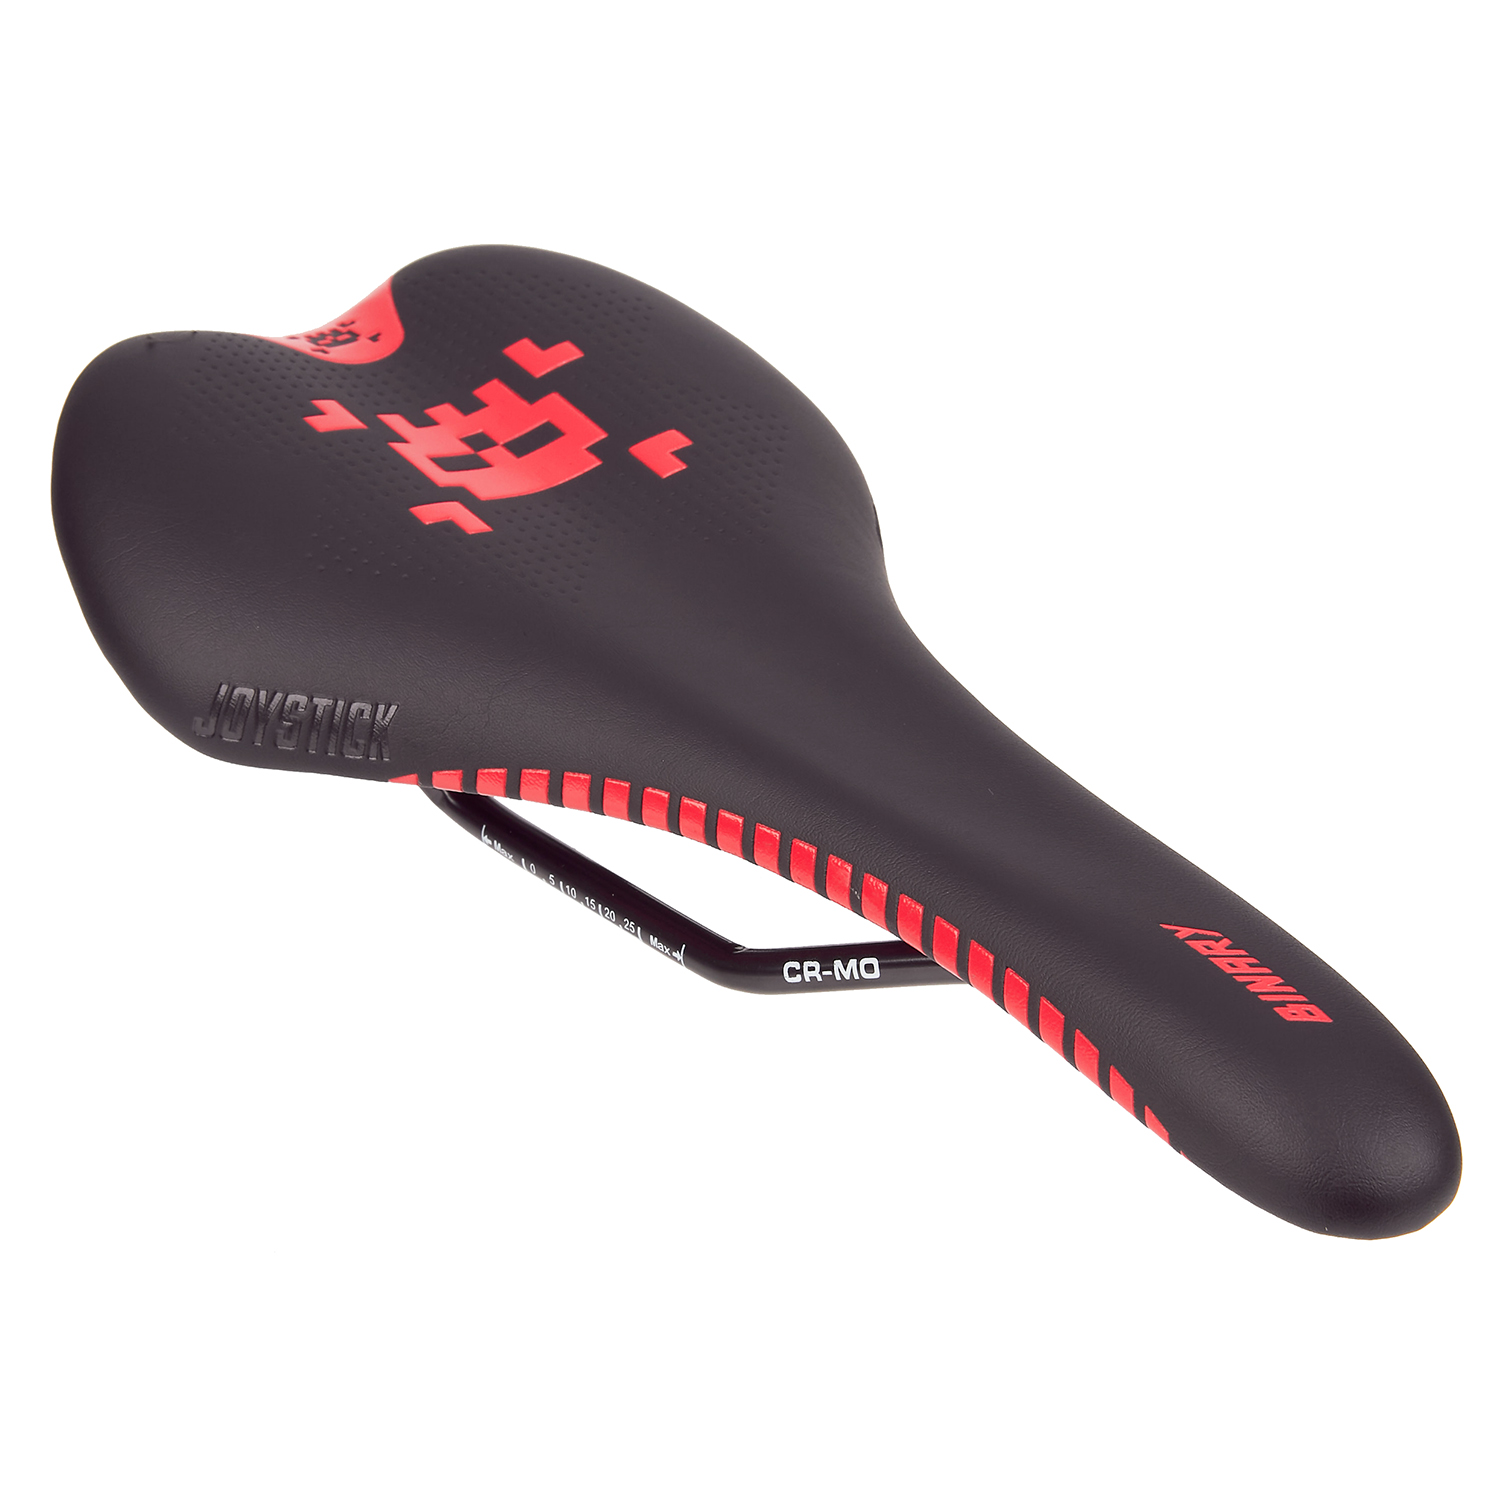 Joystick Components Selle Binary Black/Red, 279 x 139 mm